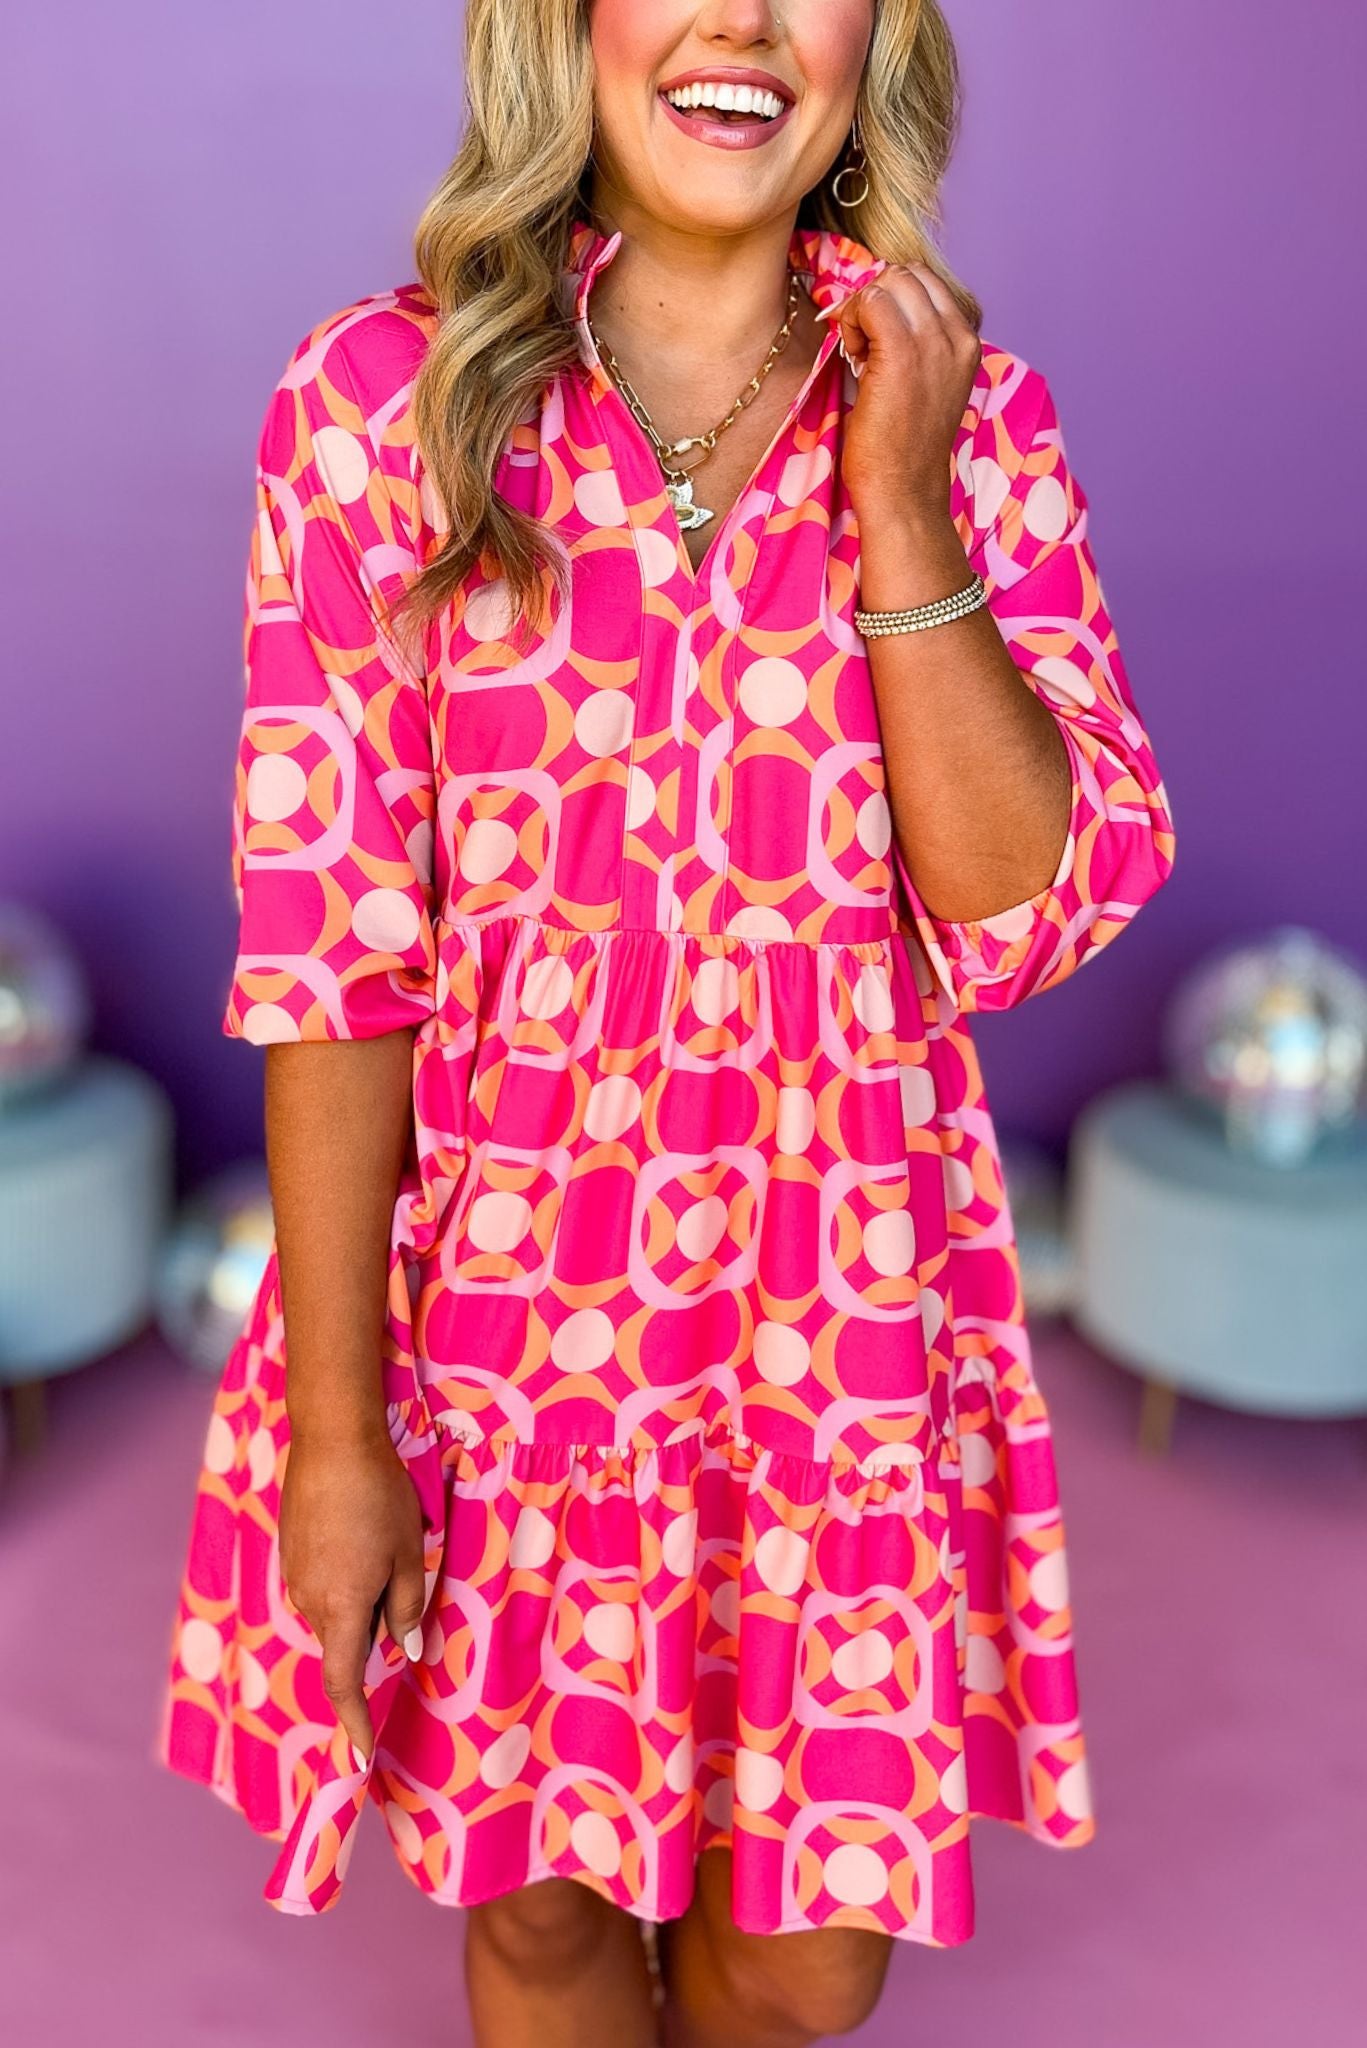 SSYS The Mix Print Tatum Dress In Hot Pink Geometric, ssys the label, ssys dress, must have dress, elevated dress, printed dress, mix print dress, mom style, church dress, weekend dress, brunch dress, shop style your senses by Mallory Fitzsimmons, ssys by Mallory Fitzsimmons  Edit alt text